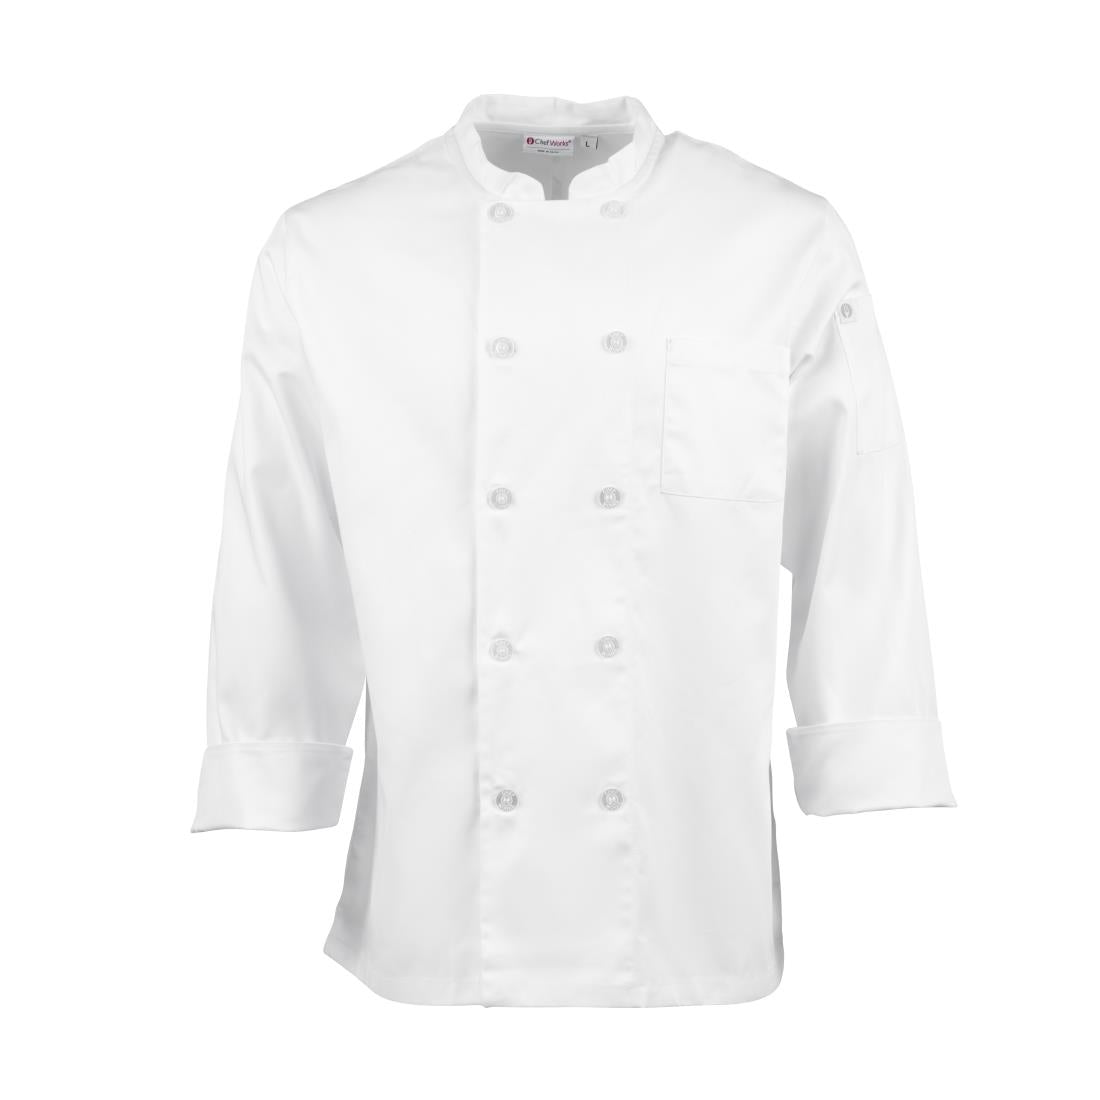 A371-7XL Chef Works Le Mans Chefs Jacket White 7XL JD Catering Equipment Solutions Ltd